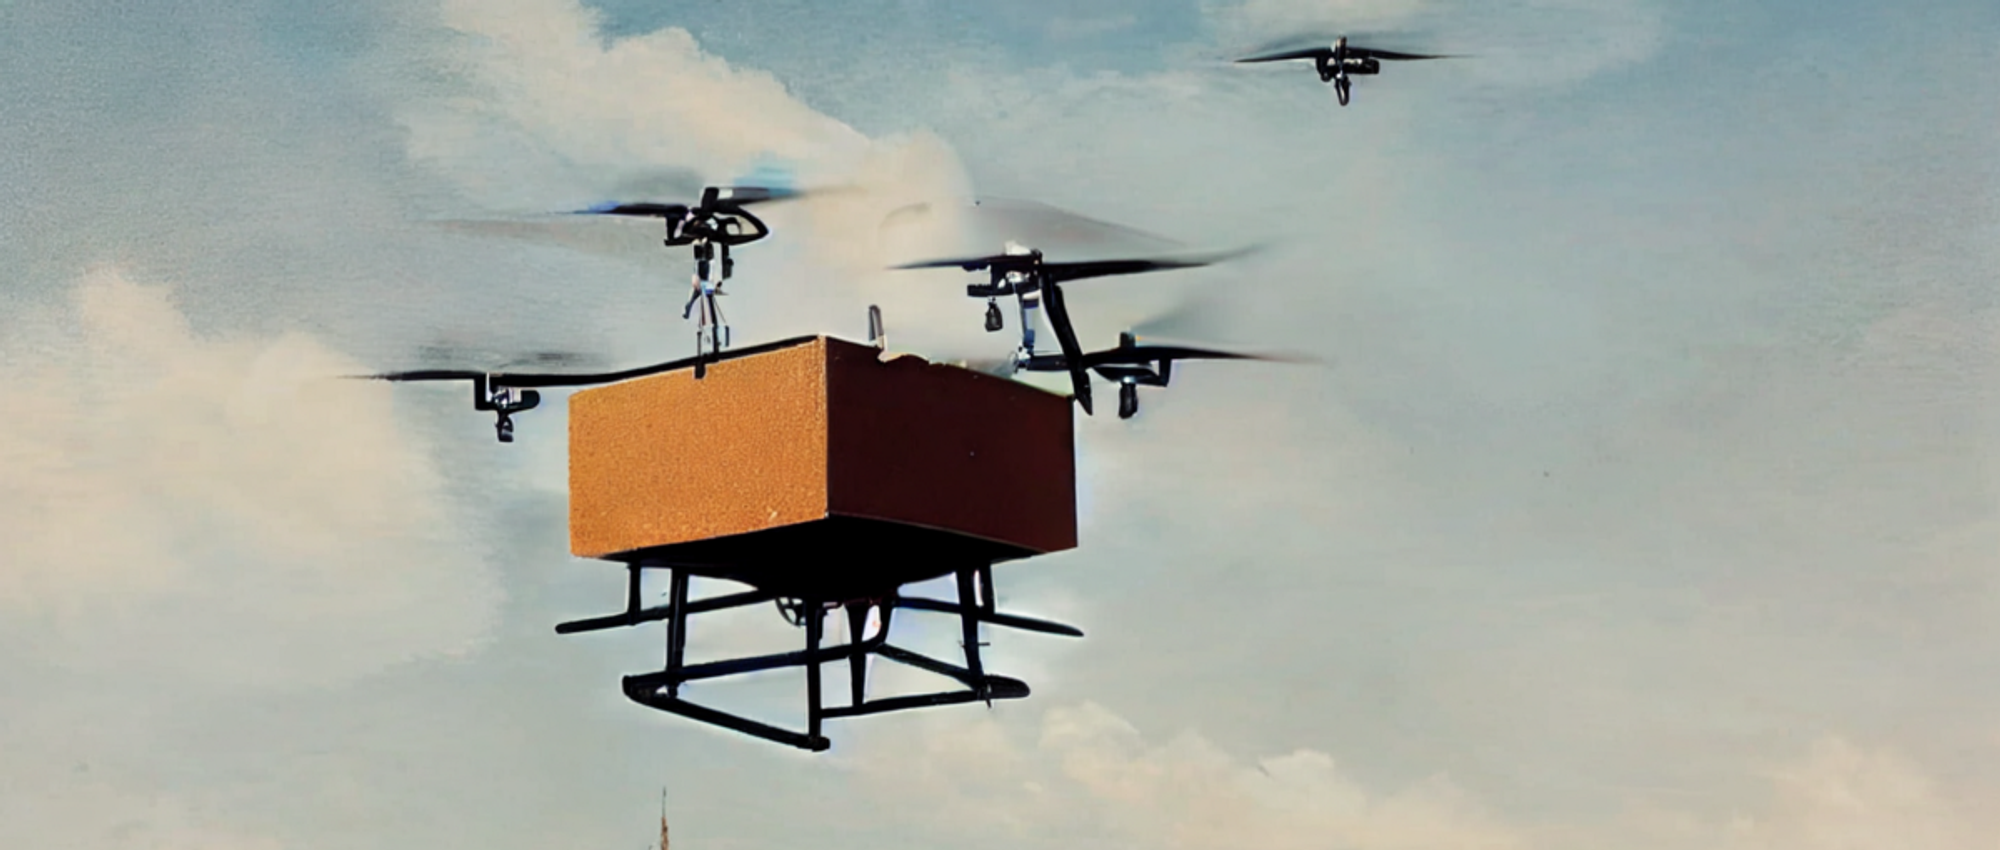 Use of drones for food delivery in the future | by Dhananjay Garg | Predict | Dec, 2022 | Medium